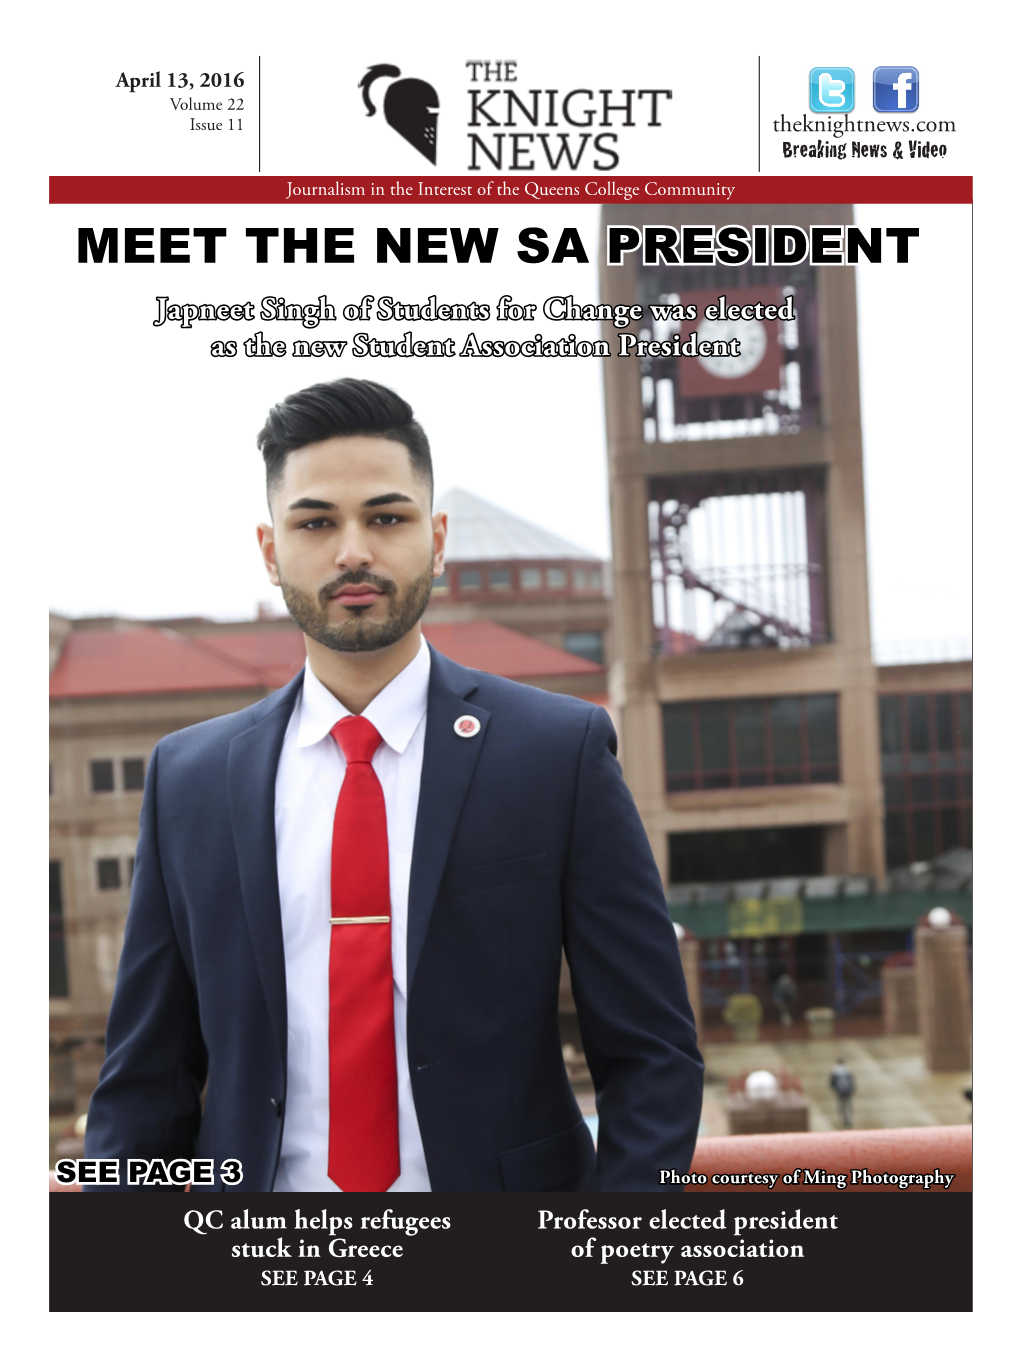 MEET the NEW SA PRESIDENT Japneet Singh of Students for Change Was Elected As the New Student Association President